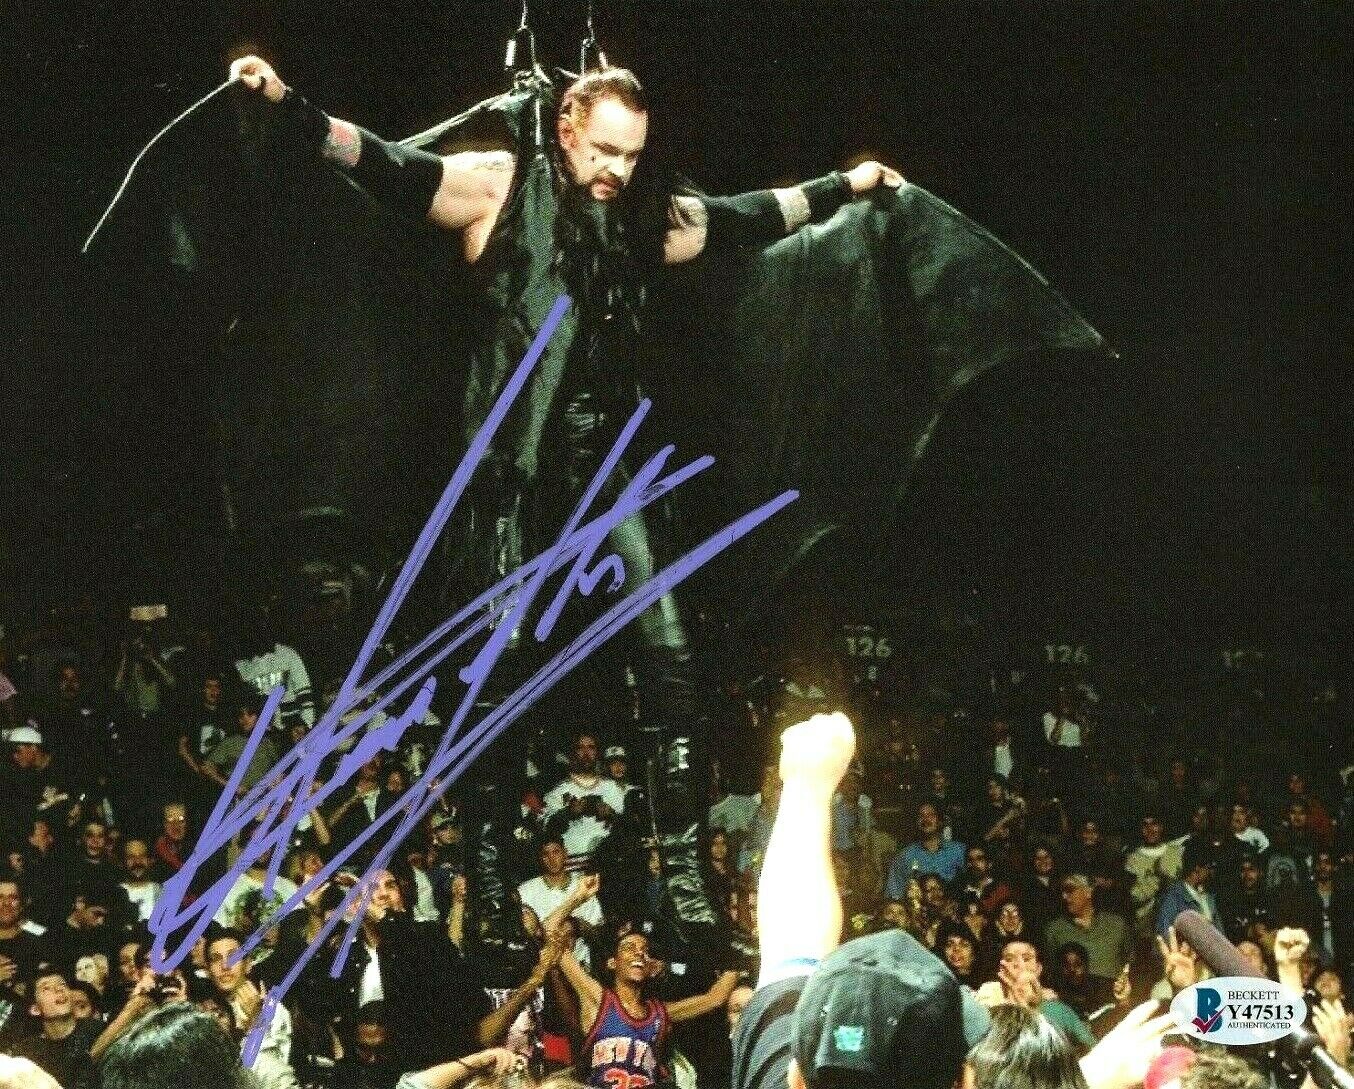 WWE THE UNDERTAKER HAND SIGNED AUTOGRAPHED 8X10 Photo Poster painting WITH BECKETT COA RARE 3